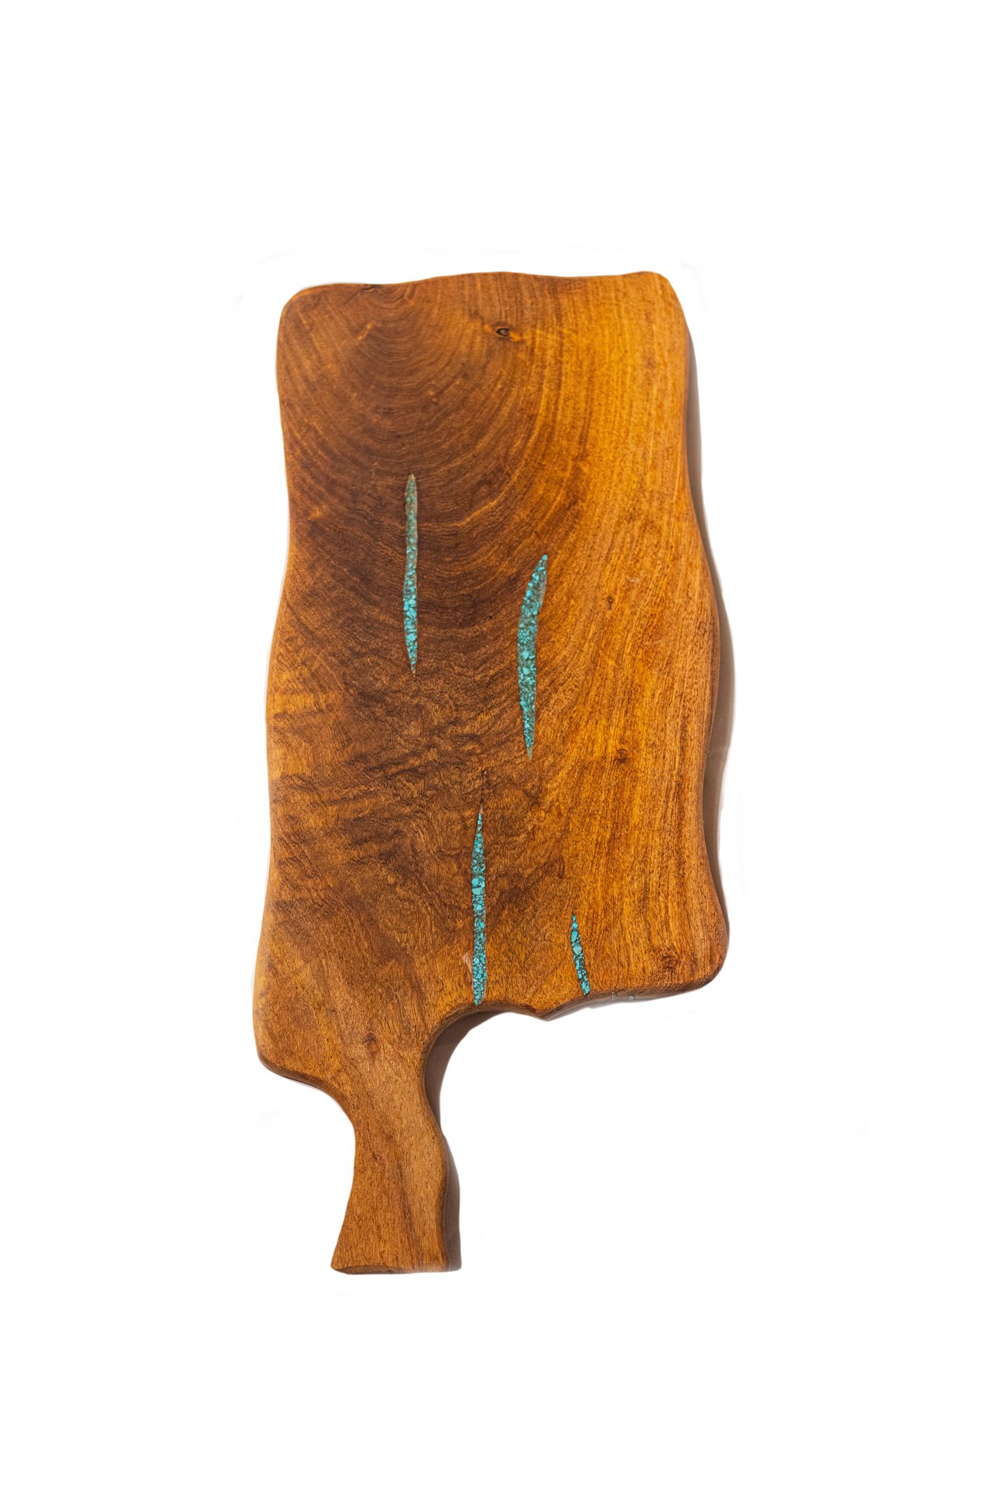 Mesquite/Turquoise Bread Knife